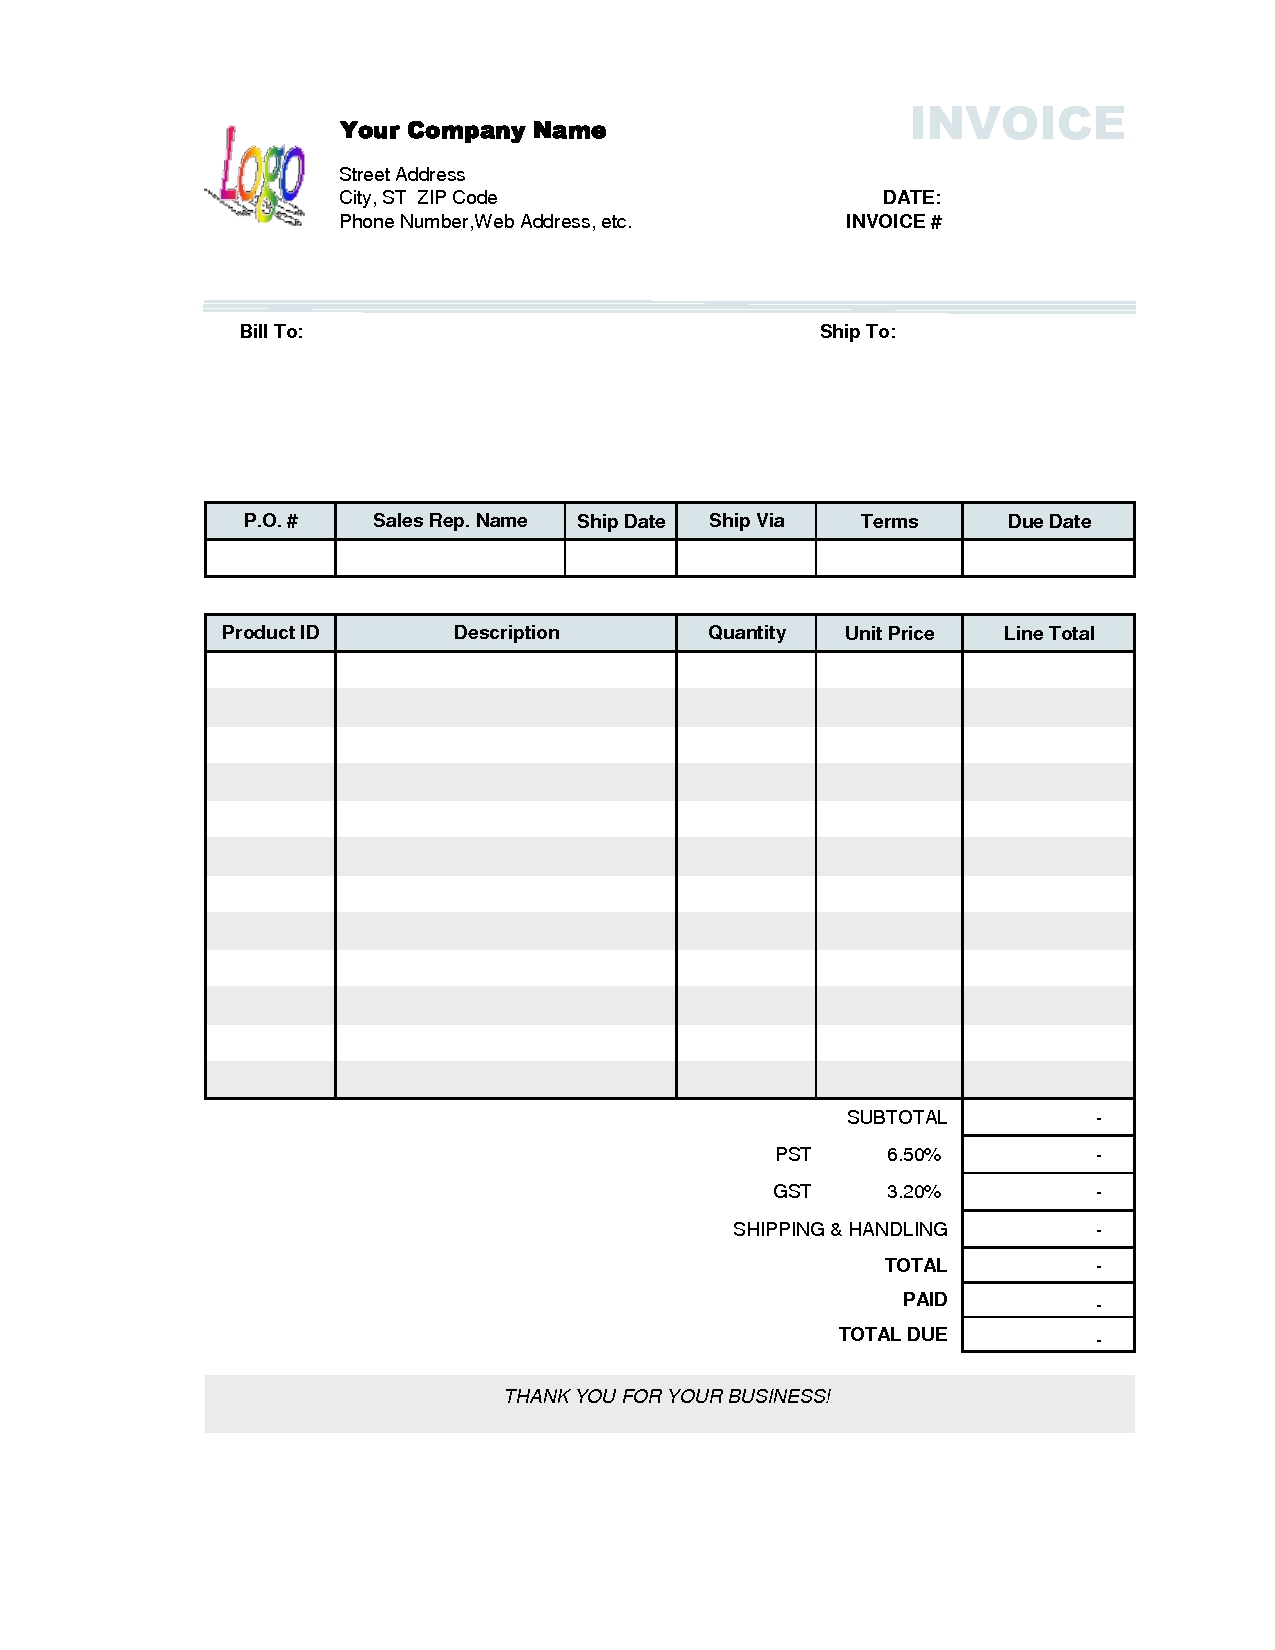 invoice template for small business invoice template invoices for small business